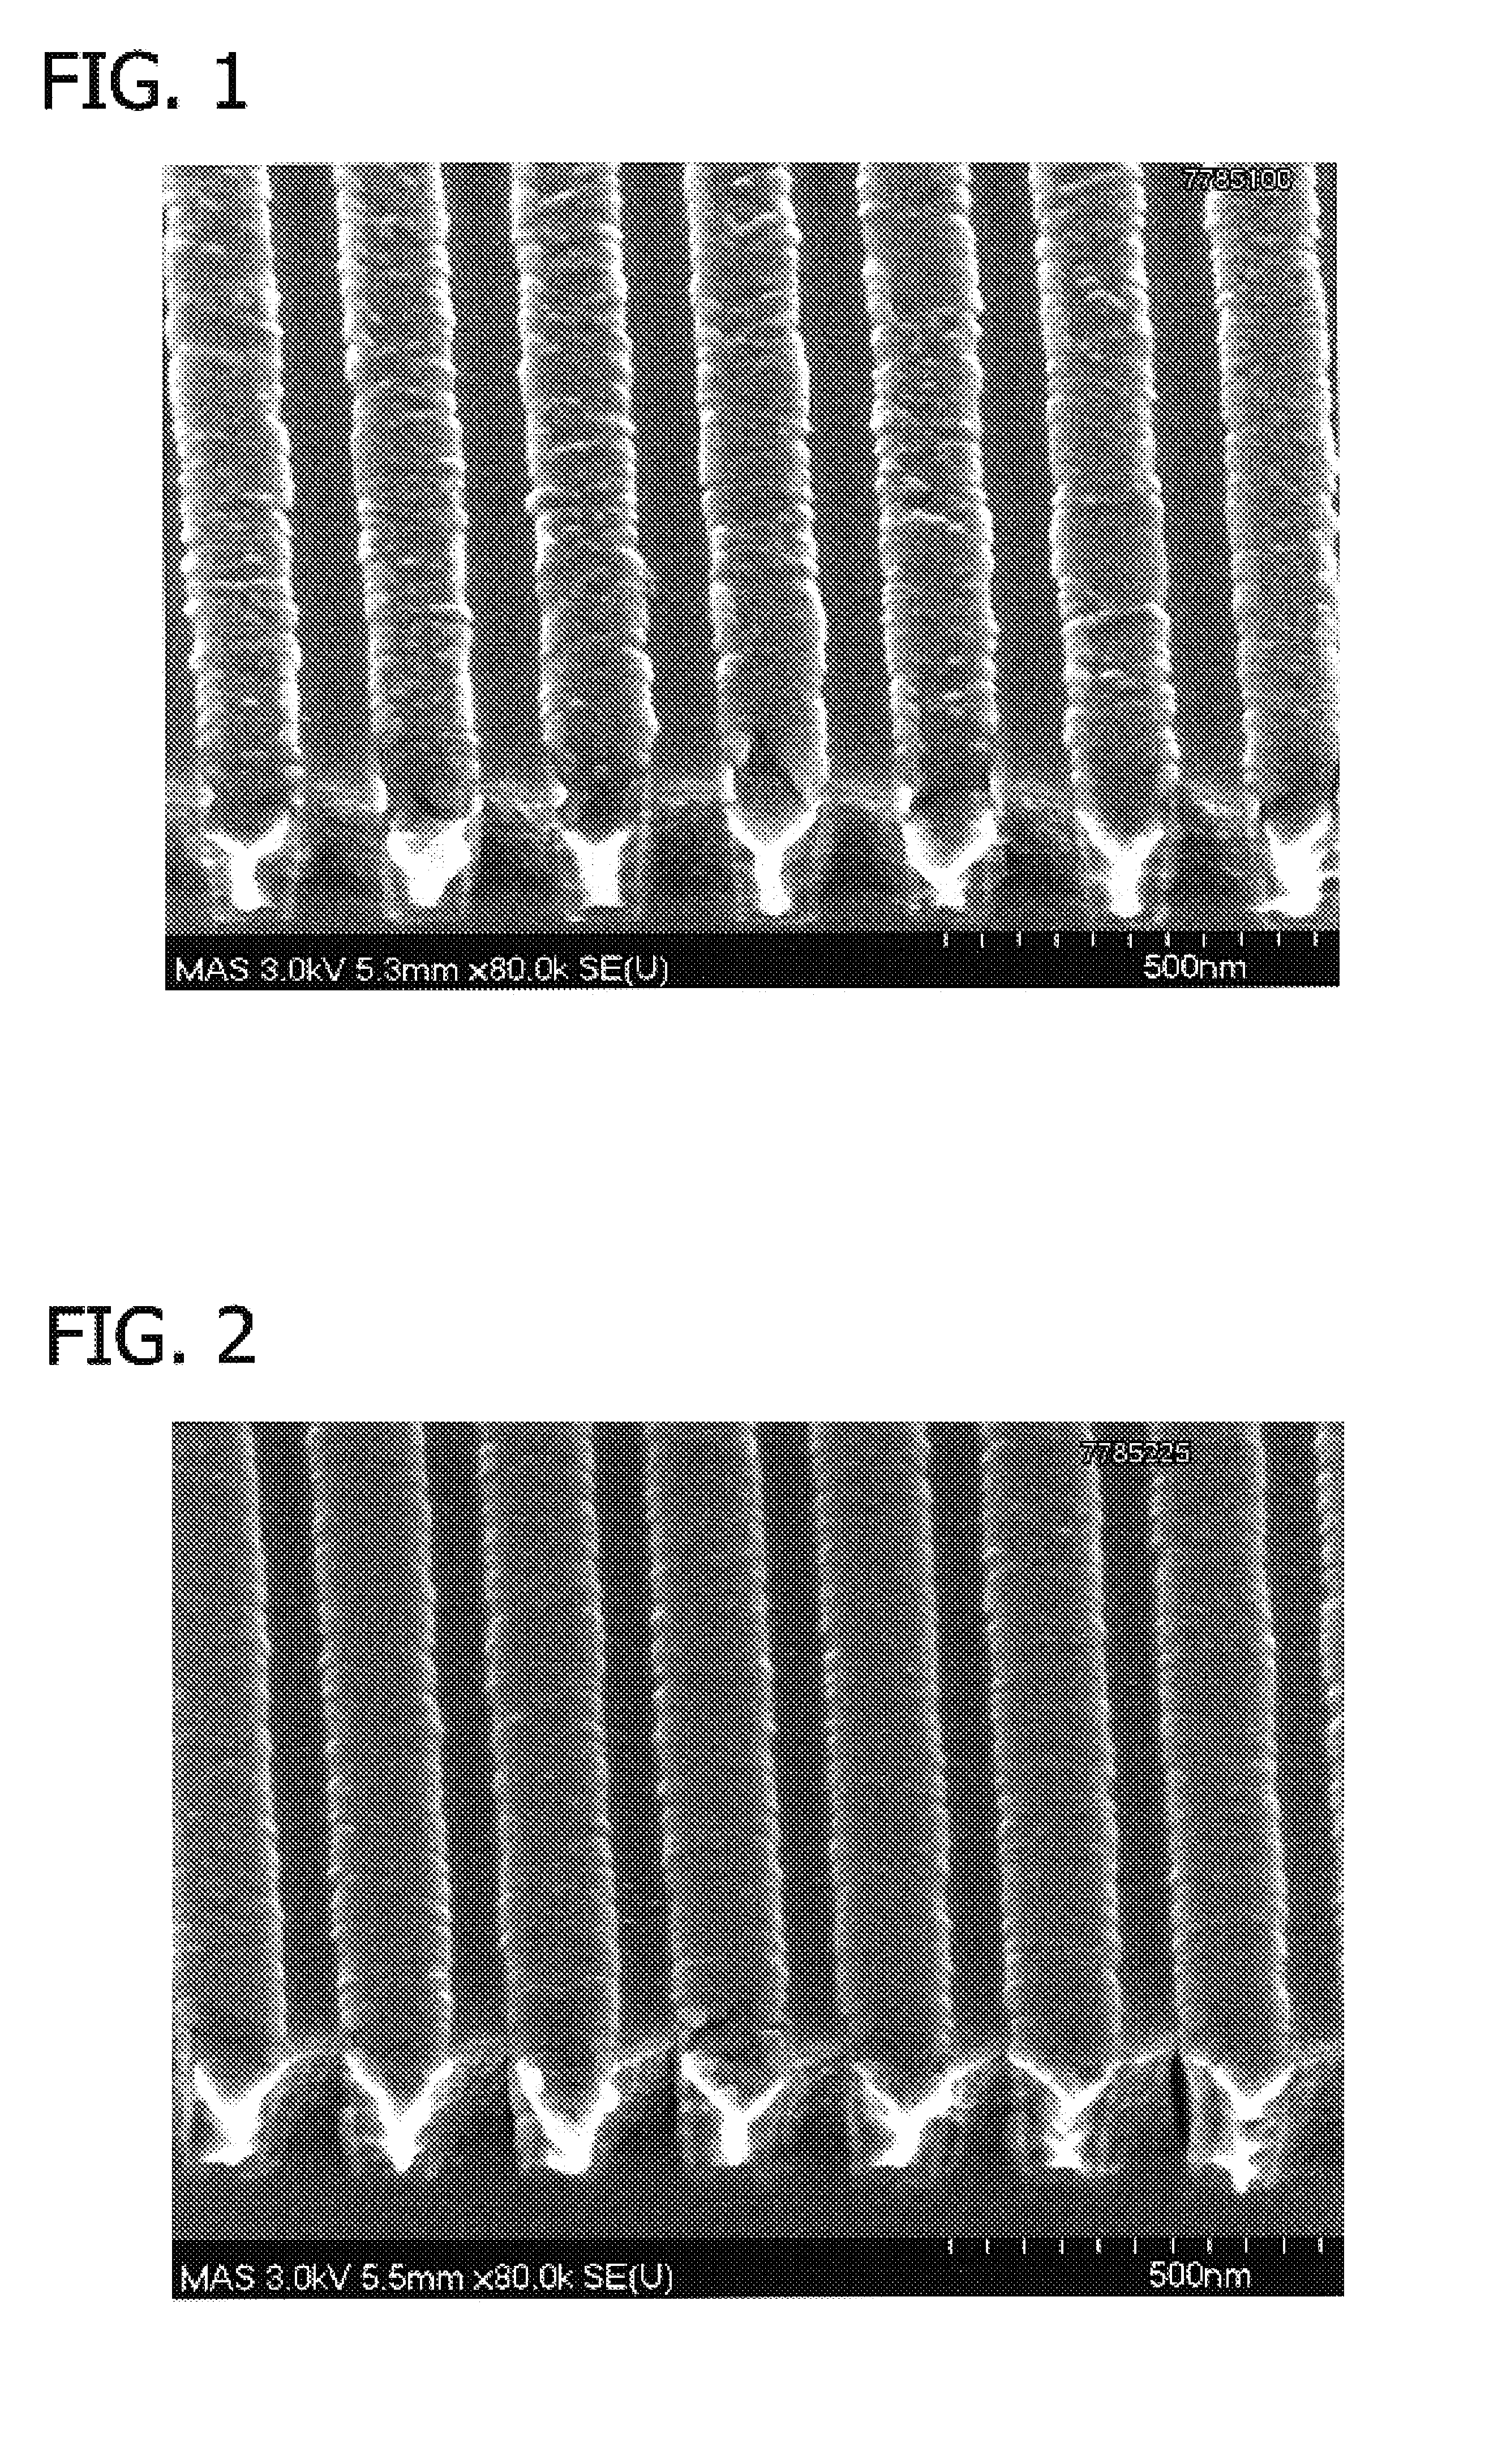 Cobalt and nickel electroless plating in microelectronic devices